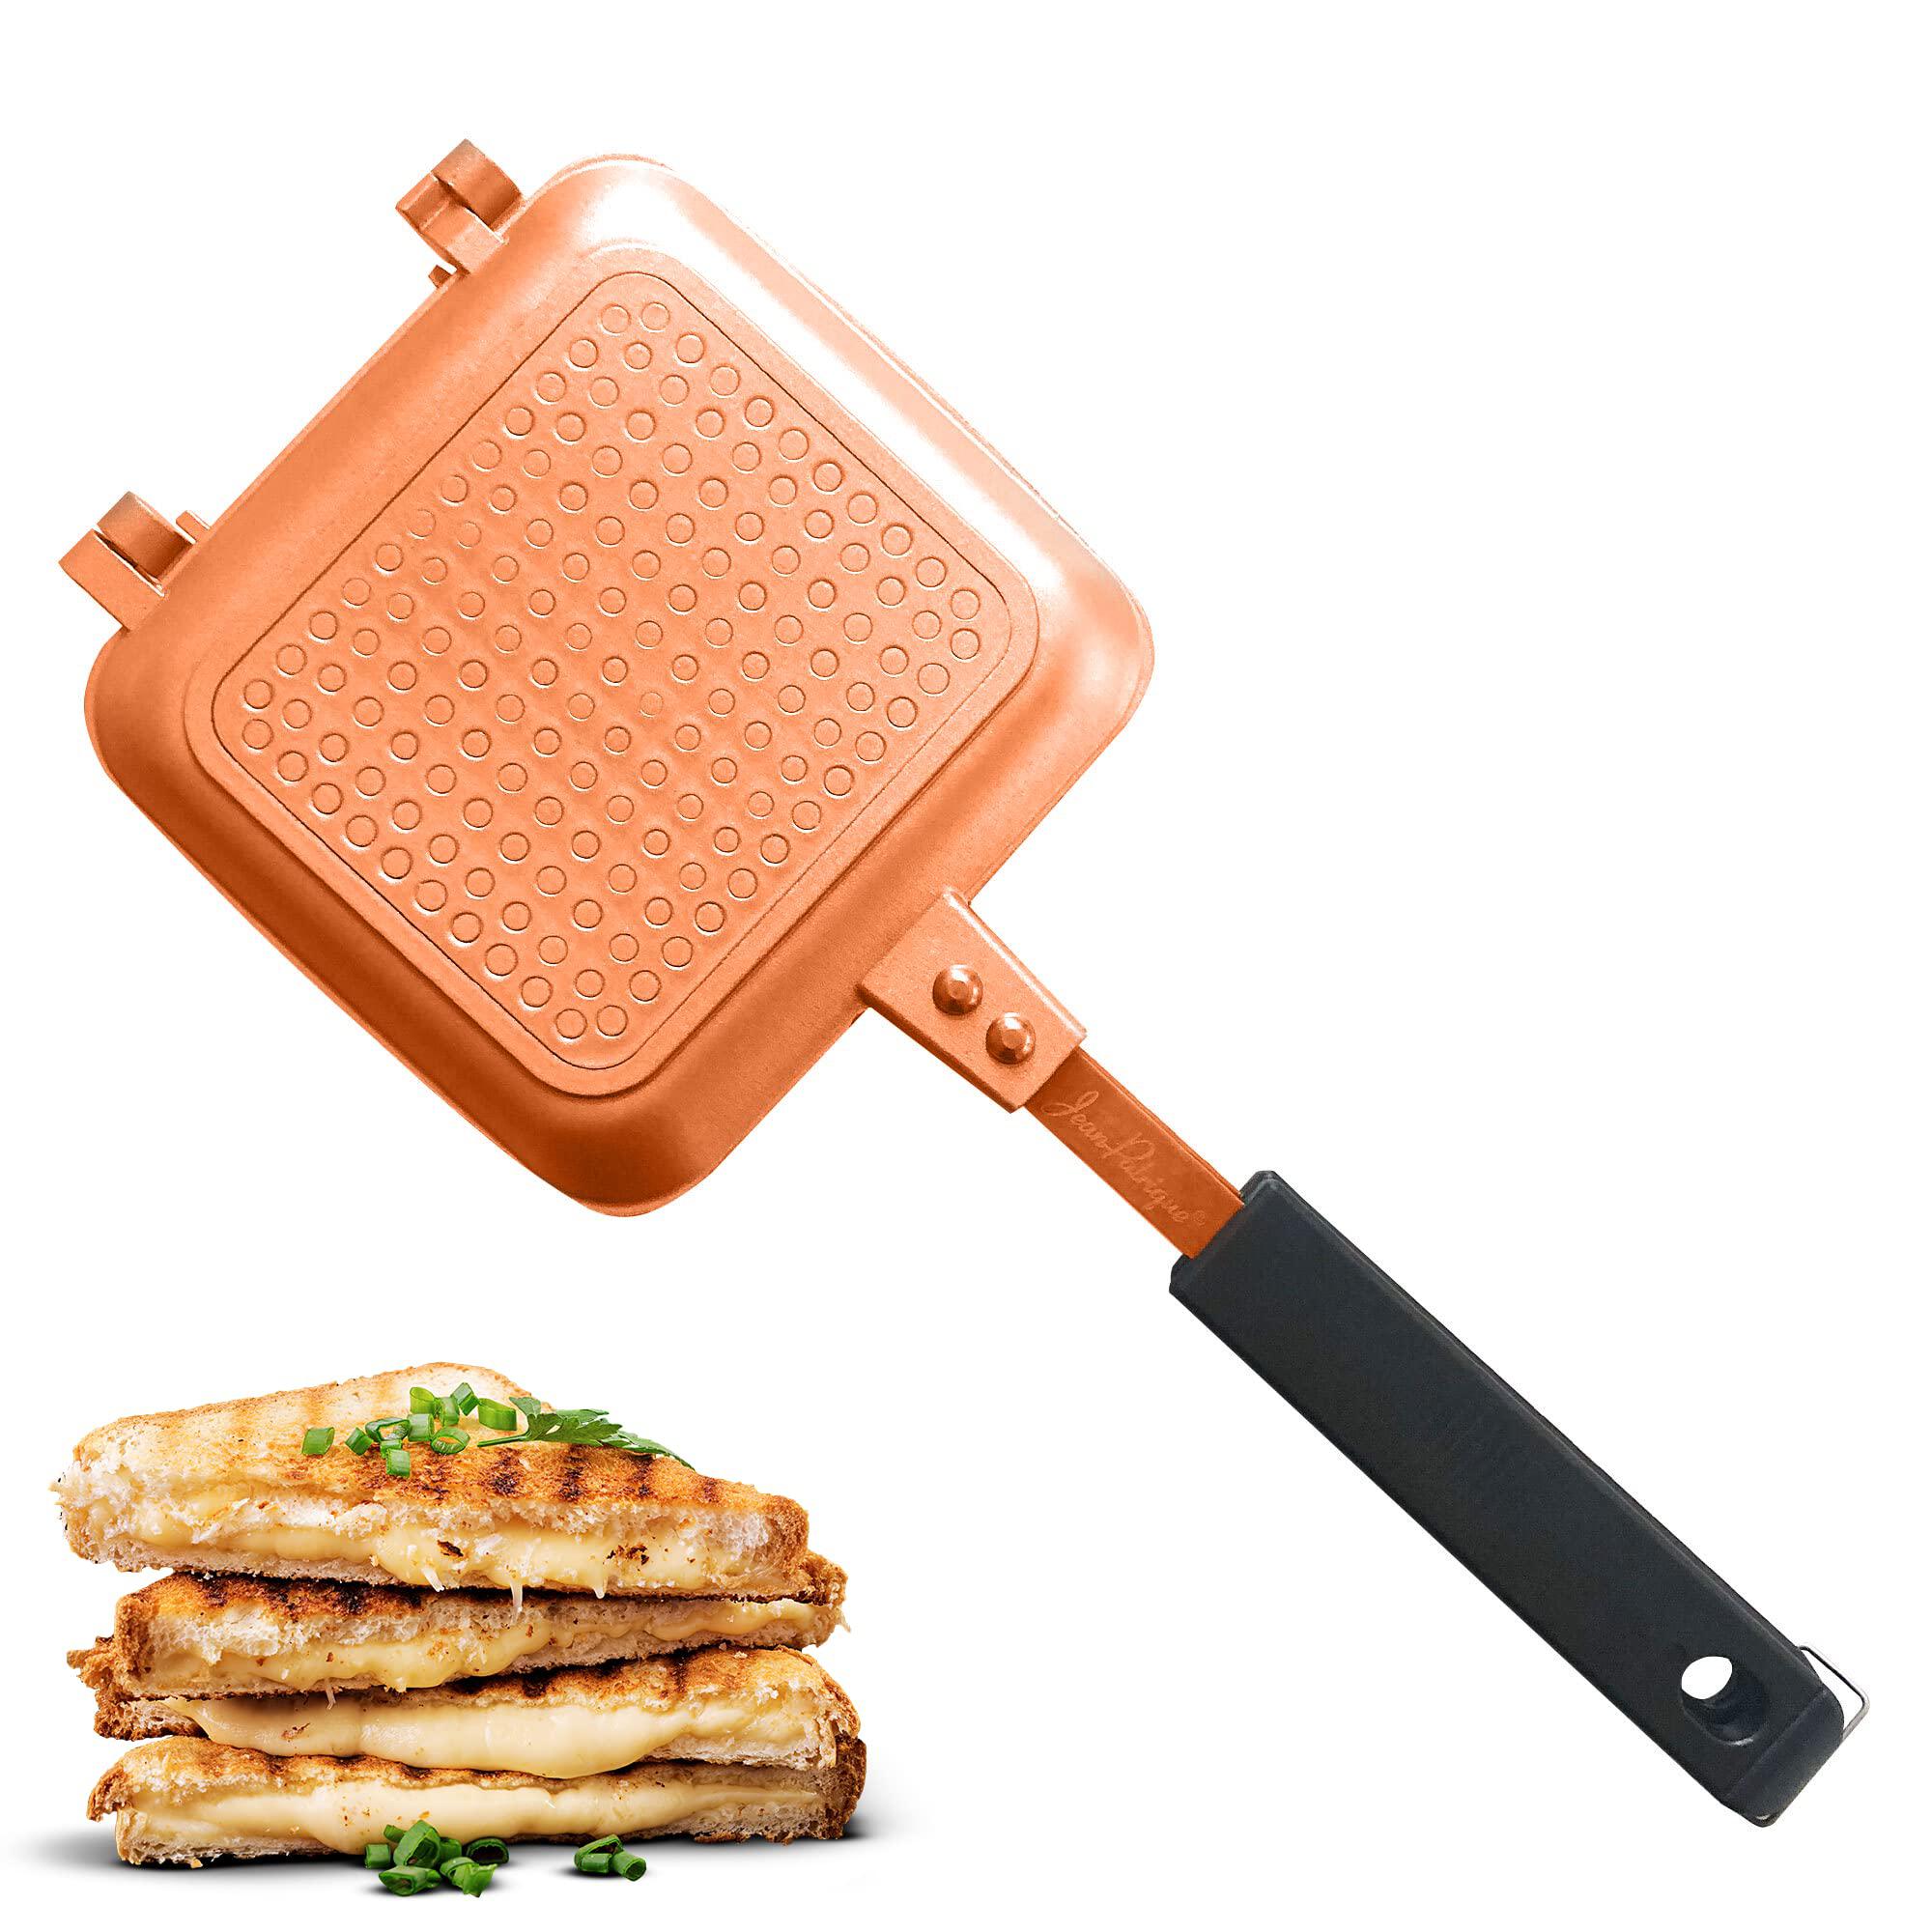 JEAN PATRIQUE toasted sandwich maker - panini press or grilled cheese maker - stove top toastie non-stick ideal for indoors and outdoors by